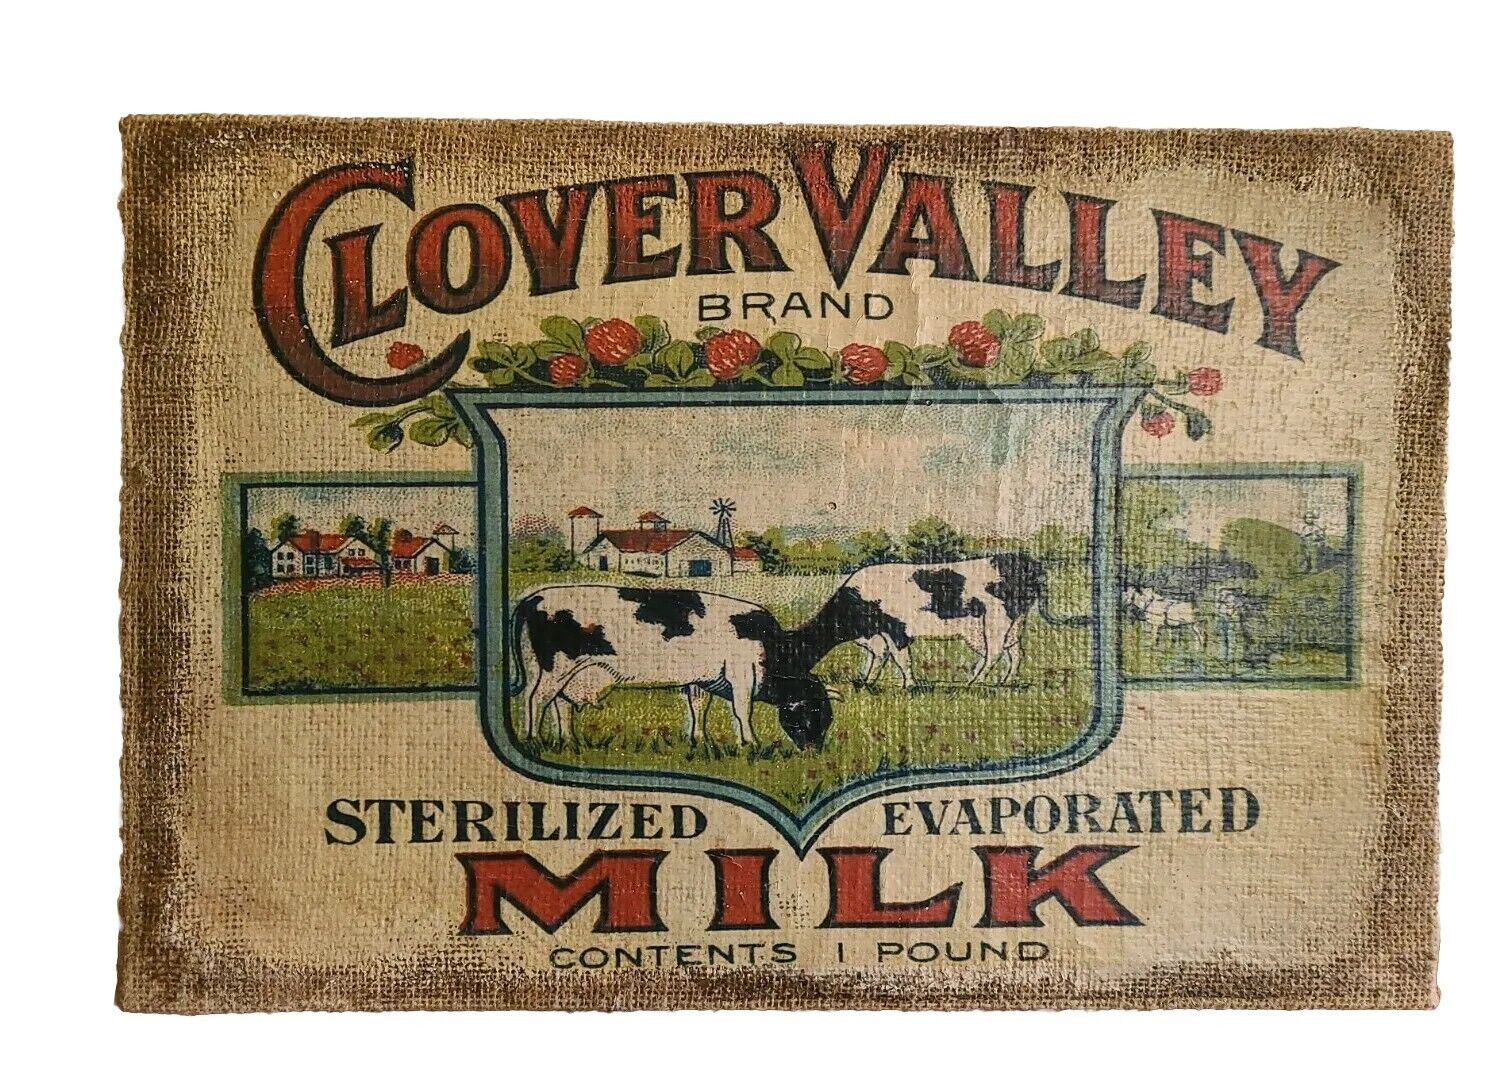 COUNTRY DECOR CLOVER VALLEY MILK ADVERTISIN ON BURLAP STRETCHED ON FRAME PICTURE